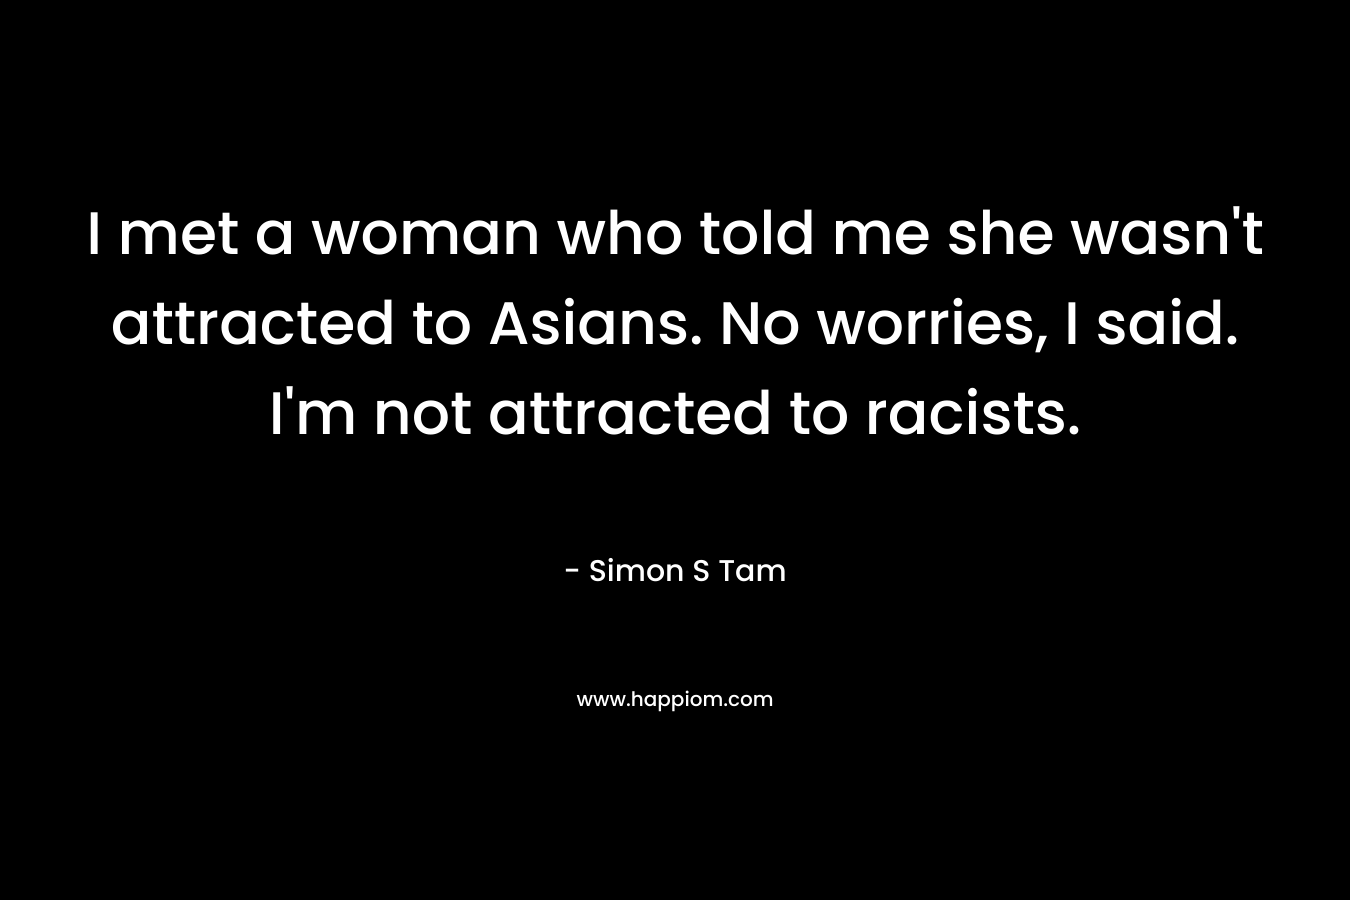 I met a woman who told me she wasn’t attracted to Asians. No worries, I said. I’m not attracted to racists. – Simon S Tam